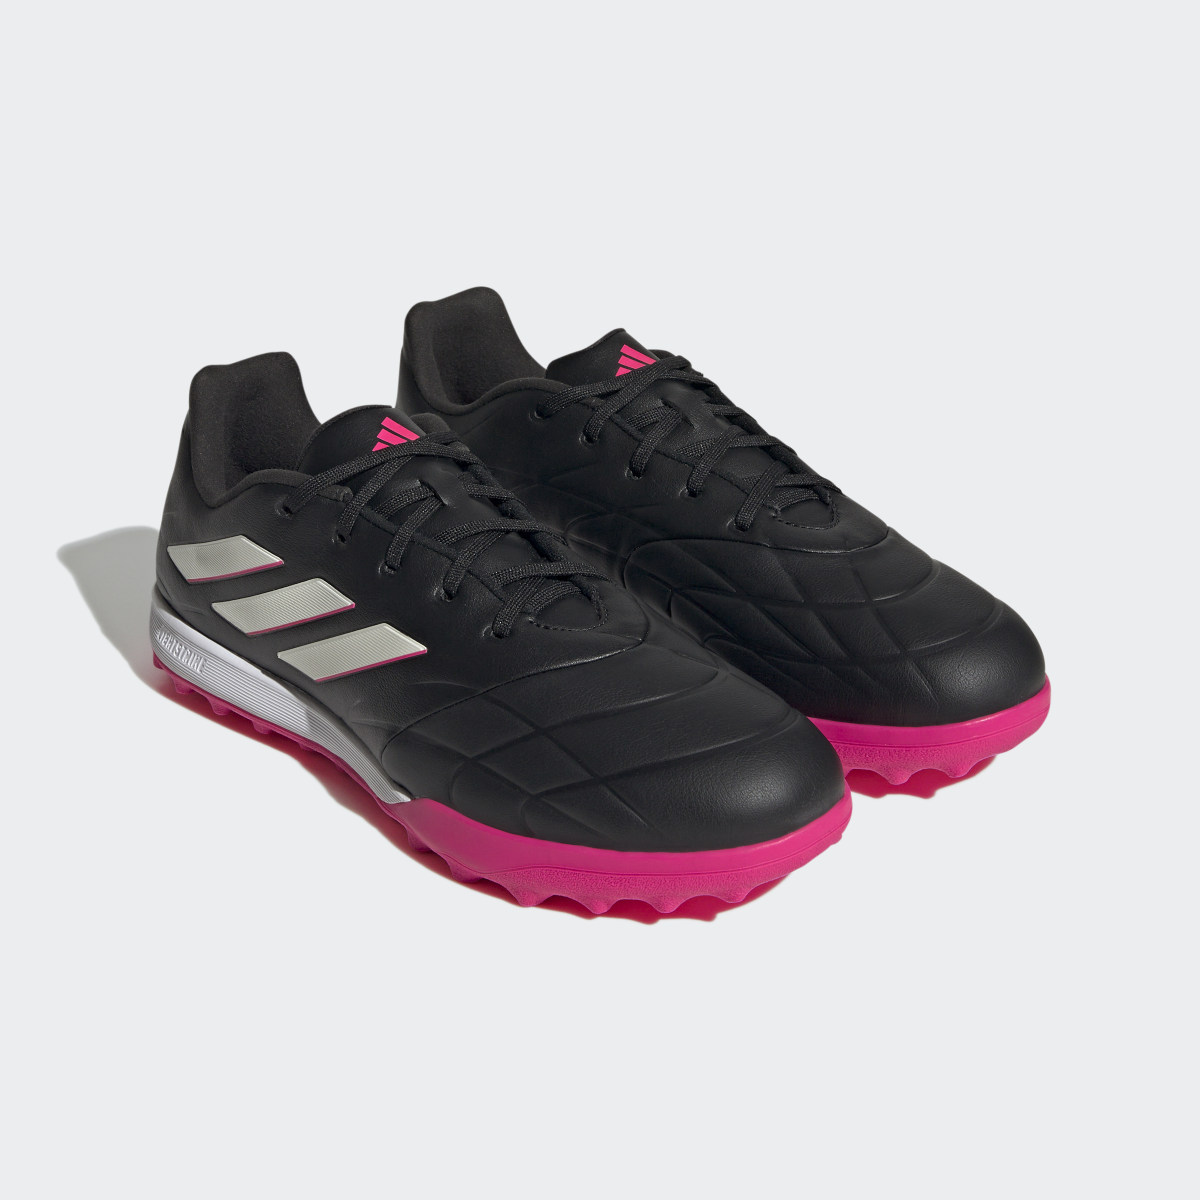 Adidas Copa Pure.3 Turf Boots. 5